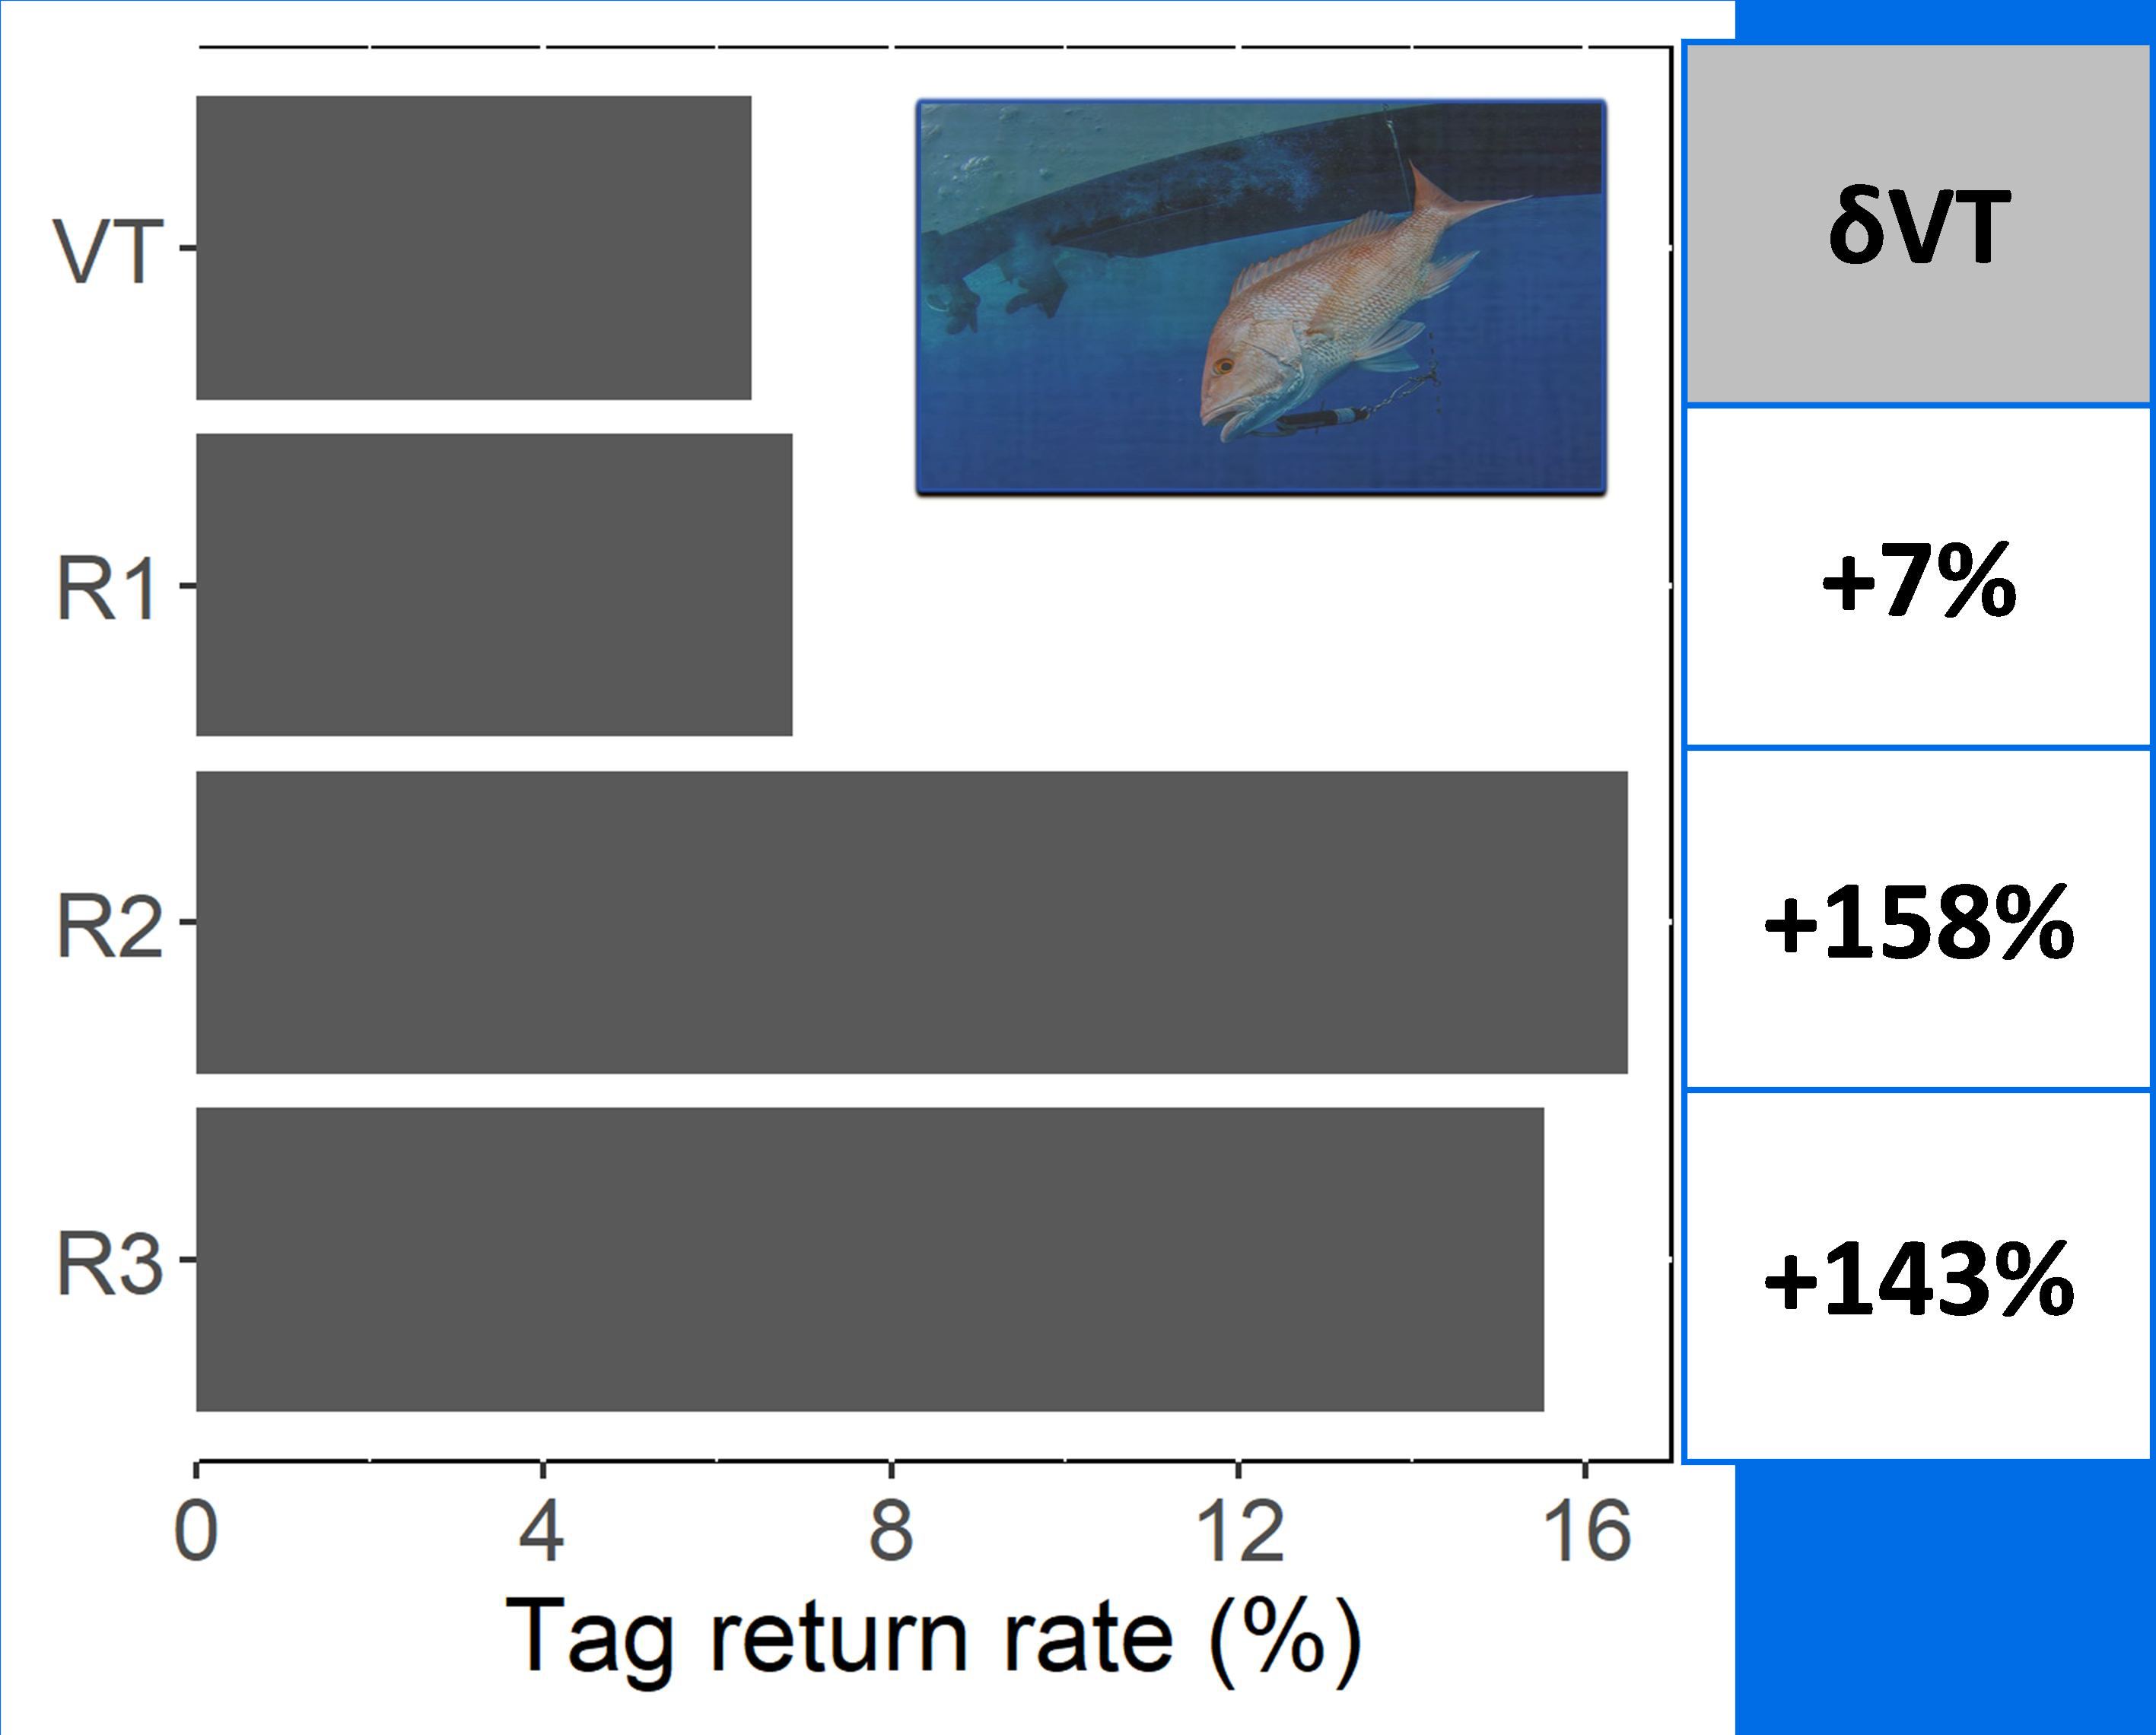 Tag return rates of red snapper across release methods for vented fish (VT), and those recompressed to 10m (R1), 20m (R2), and 30m (R3). The increase in tag returns of recompressed fish relative to vented ones is indicated in the right column.